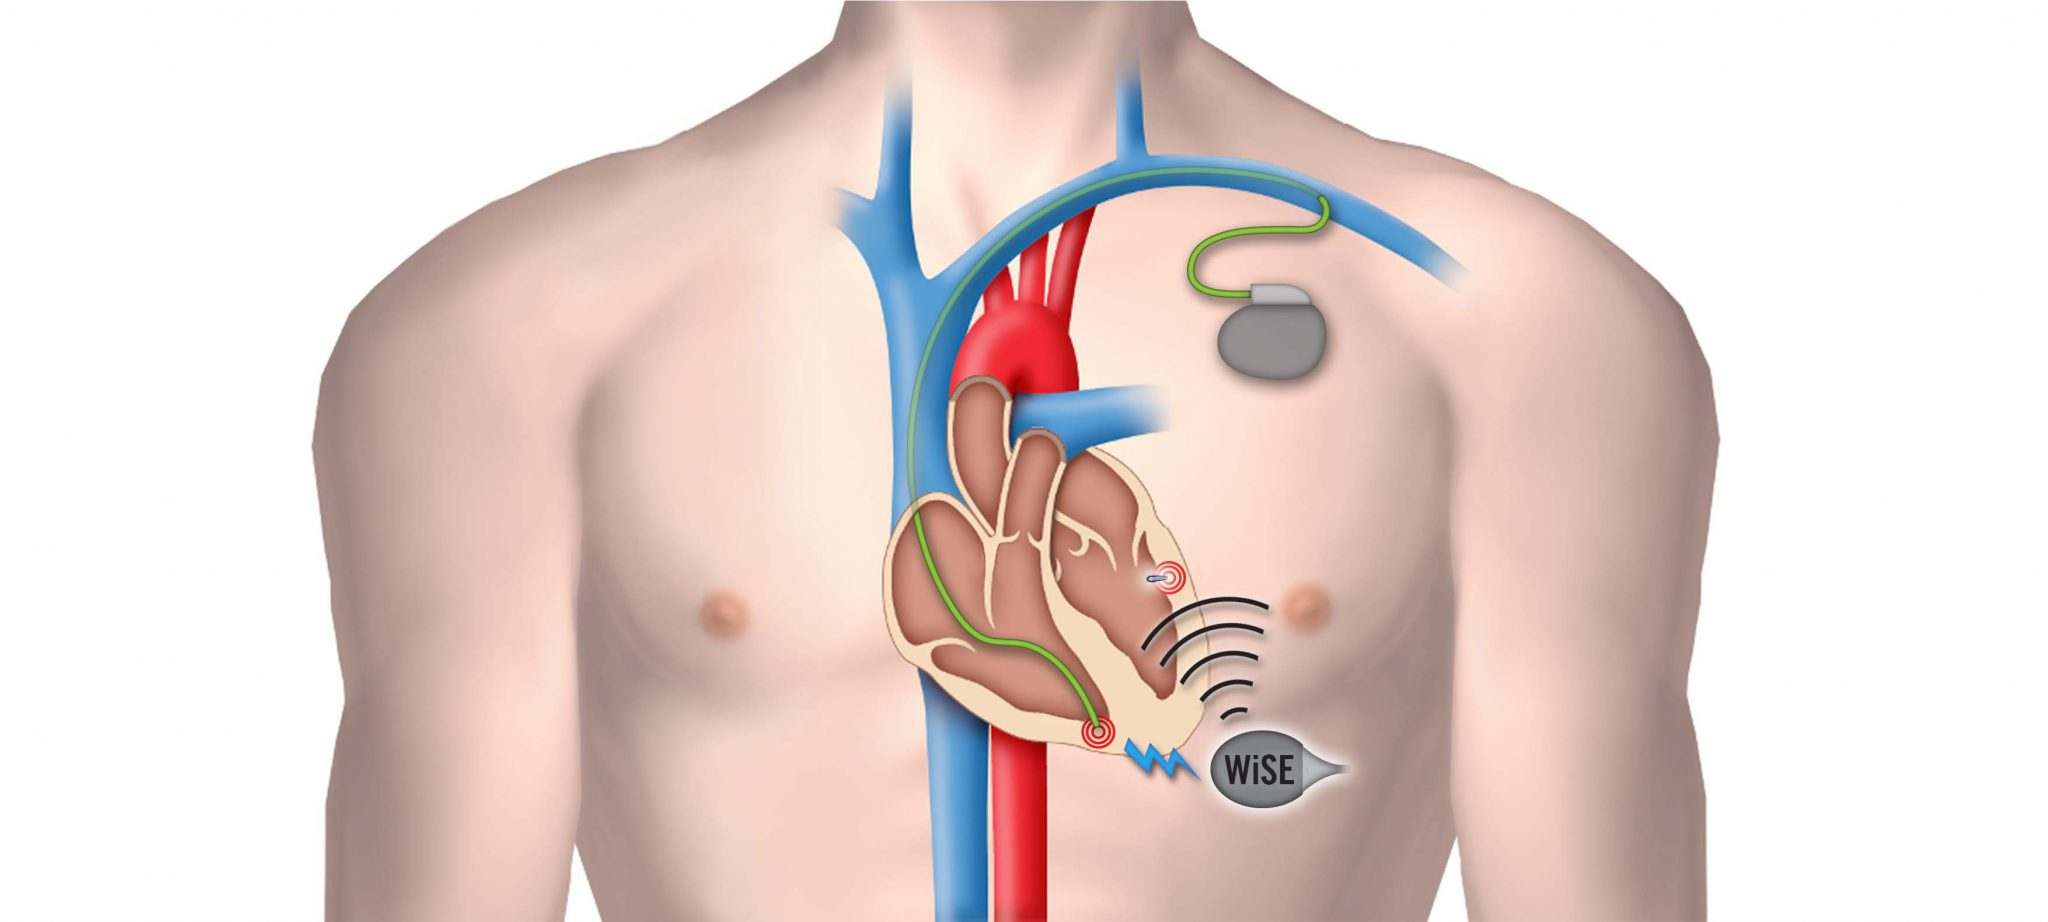 WHAT IS A PACEMAKER OF THE HEART?